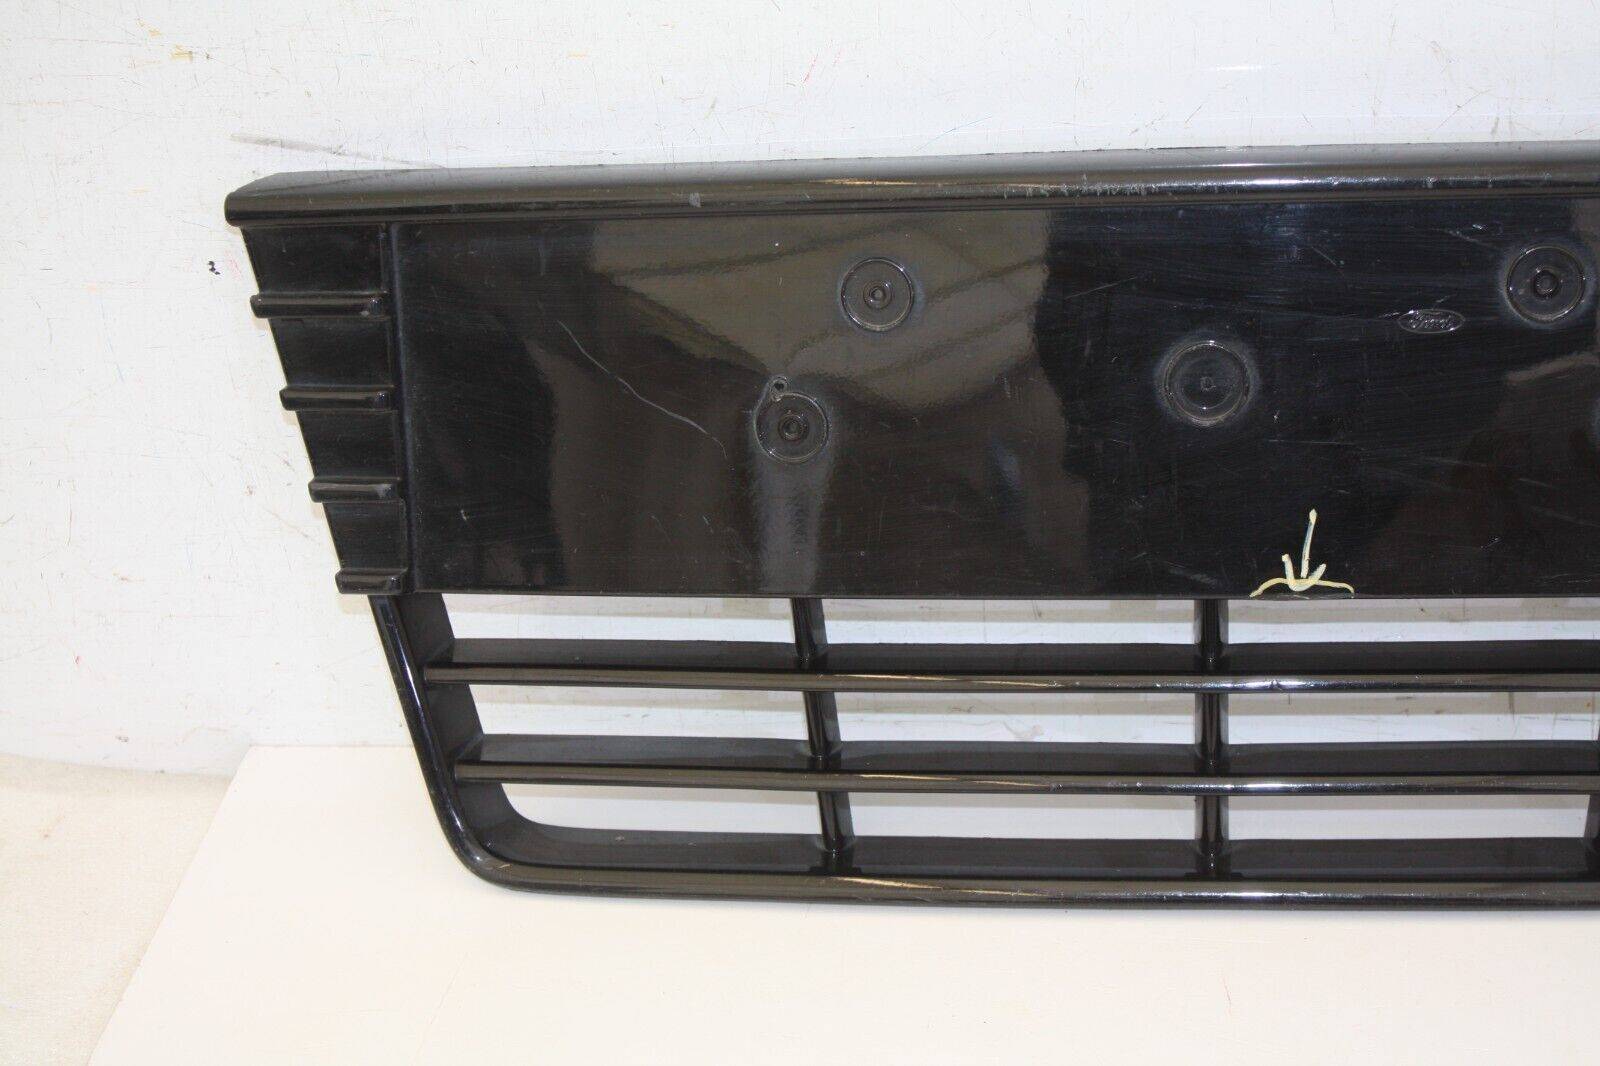 Ford-Focus-Front-Bumper-Grill-2011-TO-2014-BM51-17K945-E-Genuine-SEE-PICS-176238481574-3